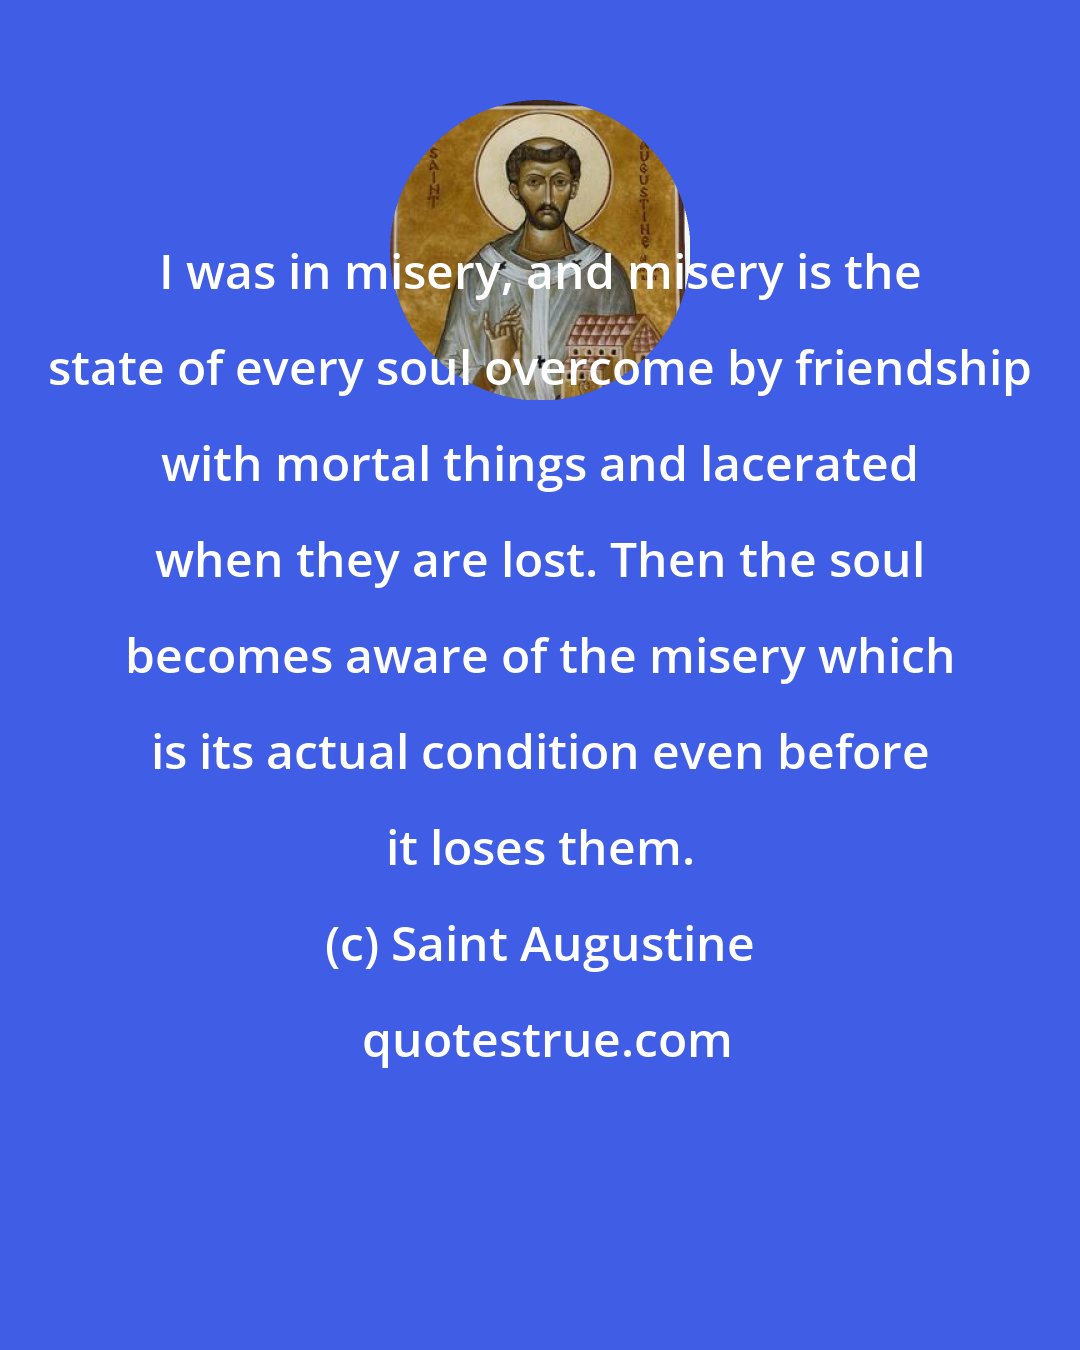 Saint Augustine: I was in misery, and misery is the state of every soul overcome by friendship with mortal things and lacerated when they are lost. Then the soul becomes aware of the misery which is its actual condition even before it loses them.